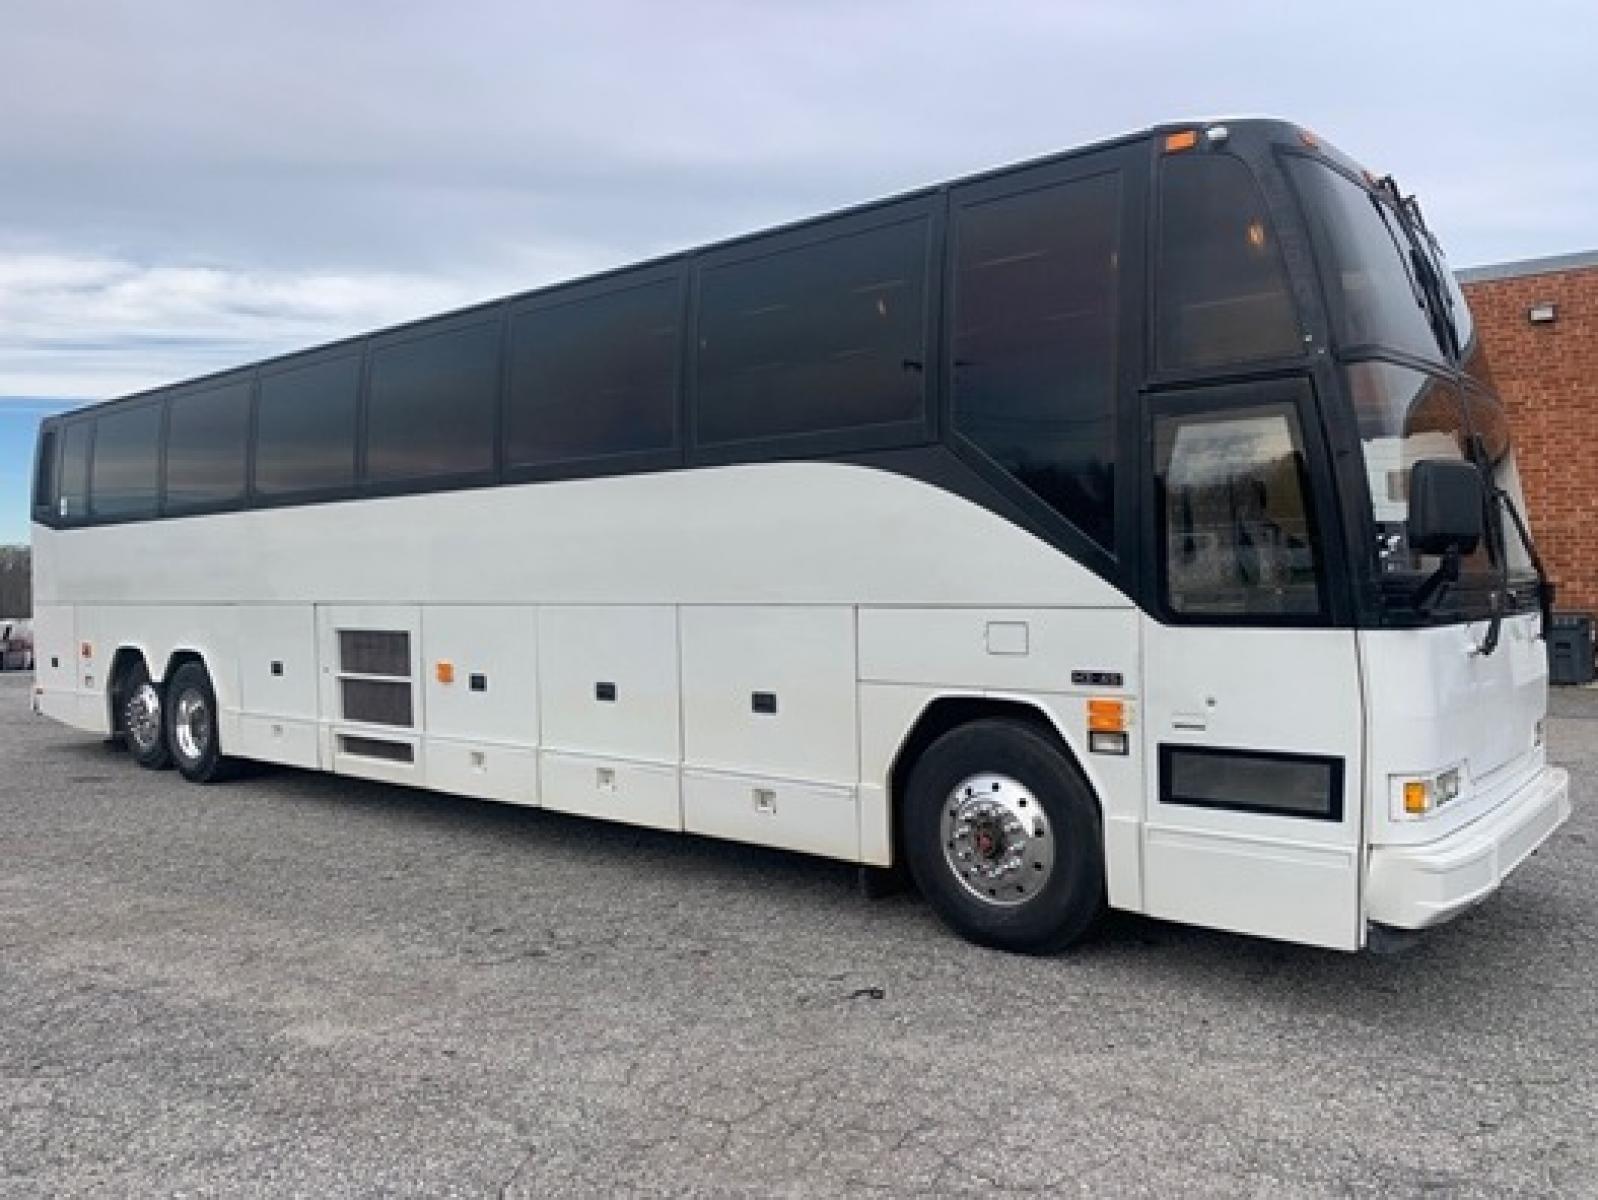 1995 White Prevost HS-45 with an Diesel engine, Allison transmission, 0.000000, 0.000000 - 1995 PREVOST HS-45 - Series 60 Detroit Diesel - Allison Automatic Transmission - 45' - Alloy Wheels - 56 Passengers - Enclosed Parcel Racks - 3 Flat Screens and DVD - Restroom - One Owner - Southern Coach Approx 1.1mil recent motor trans change. - Photo #0